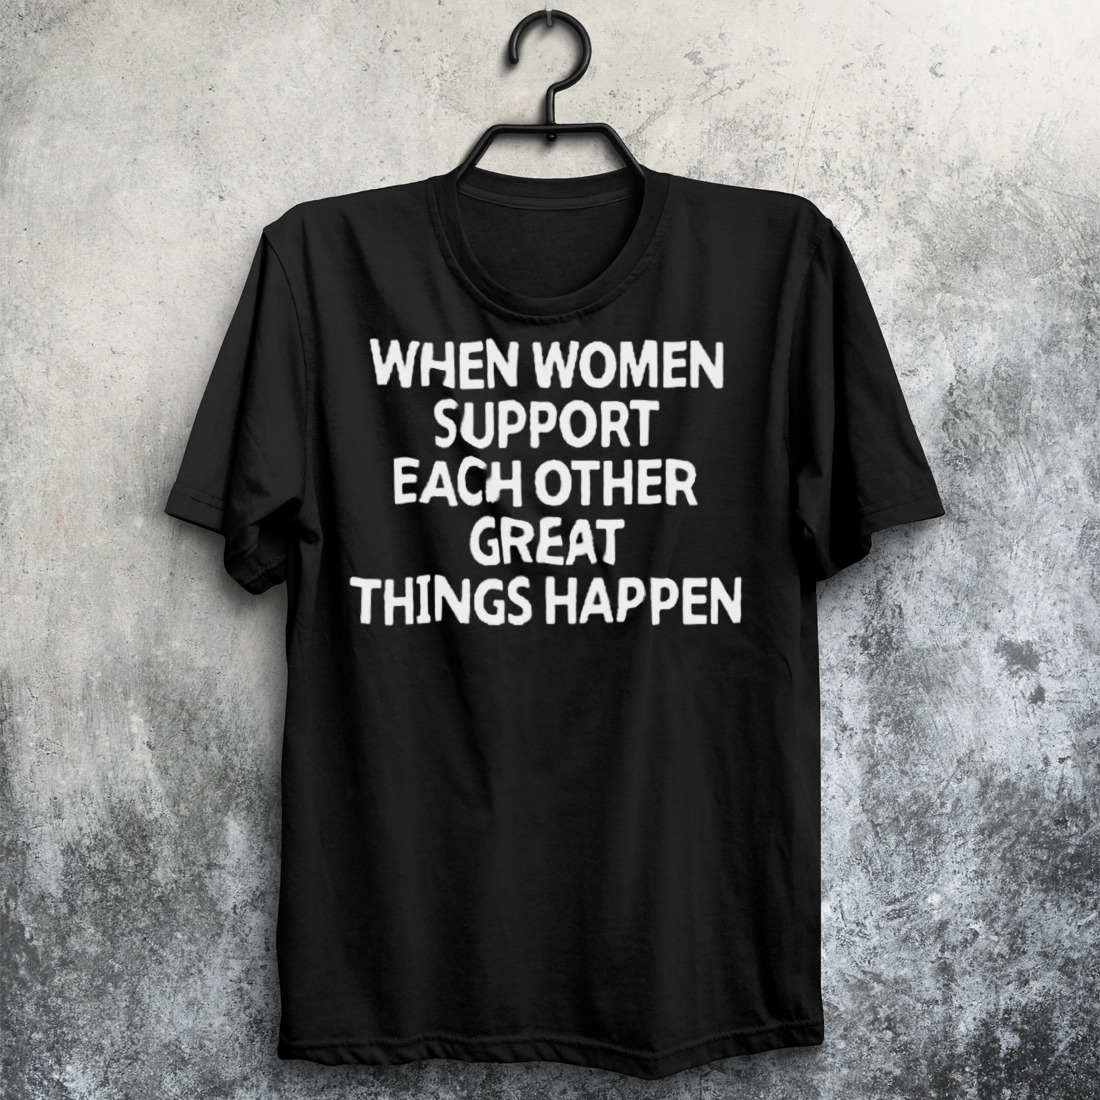 When Women Support Each Other Great Things Happen Shirt